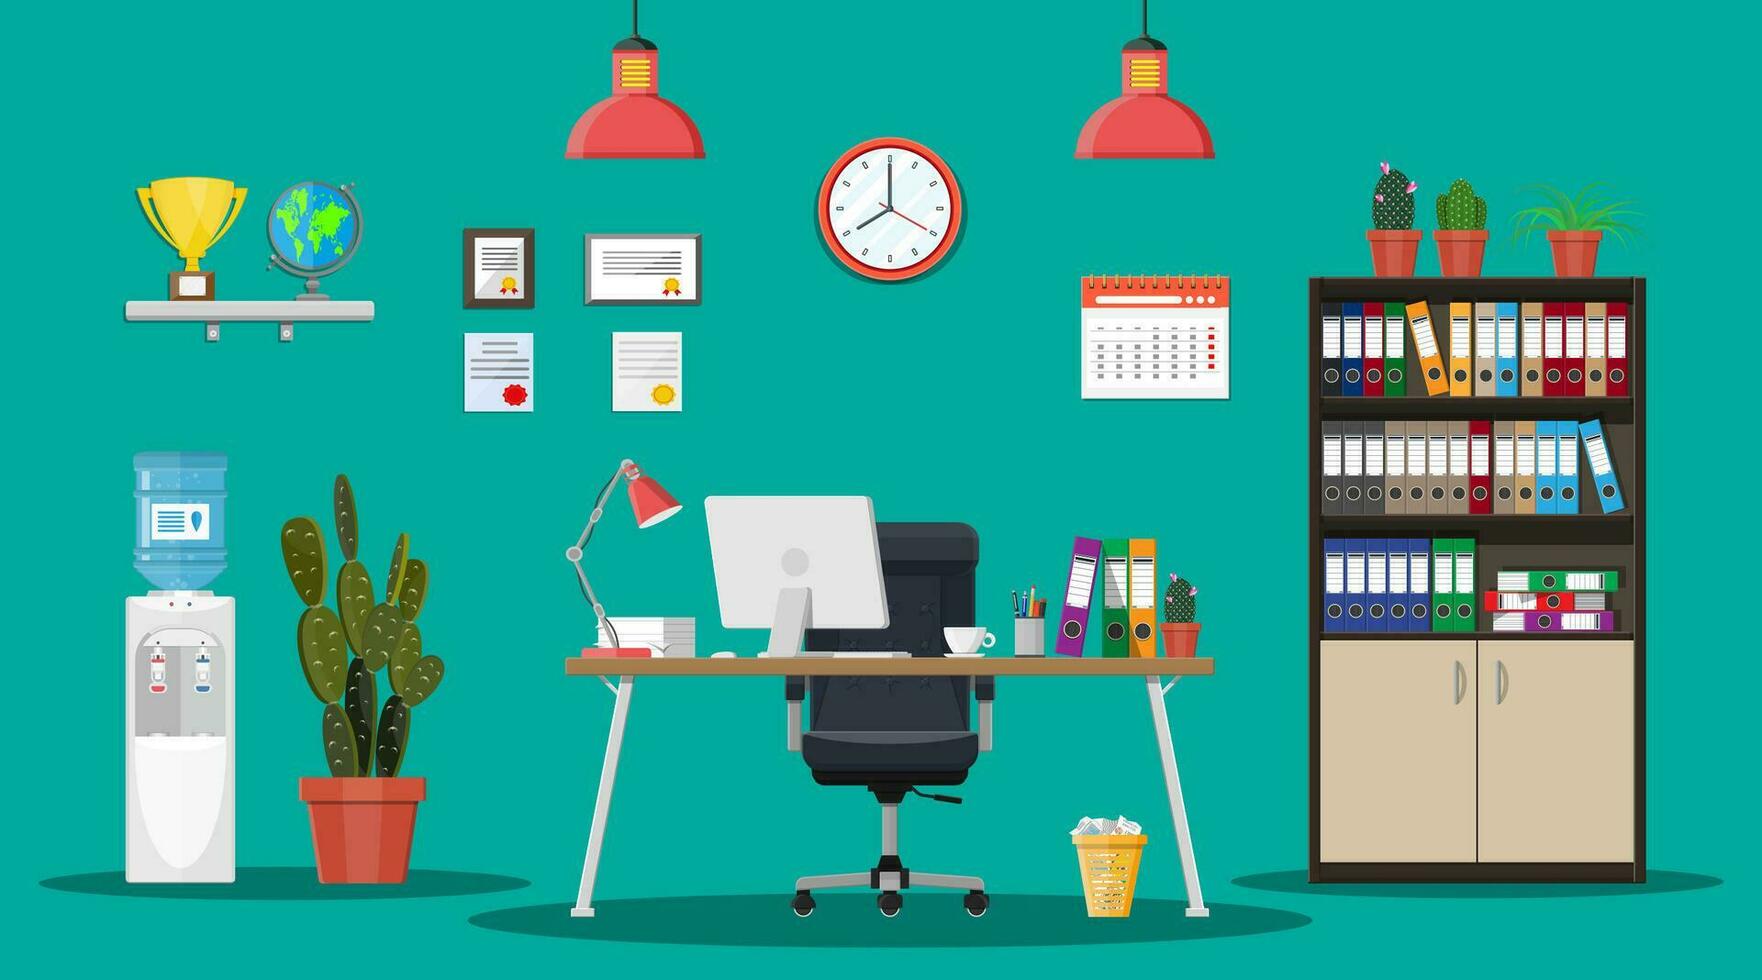 Office building interior. Desk with computer, chair, lamp, books and document papers. Water cooler, tree, clocks, calendar, cup. Modern business workplace Vector illustration in flat style